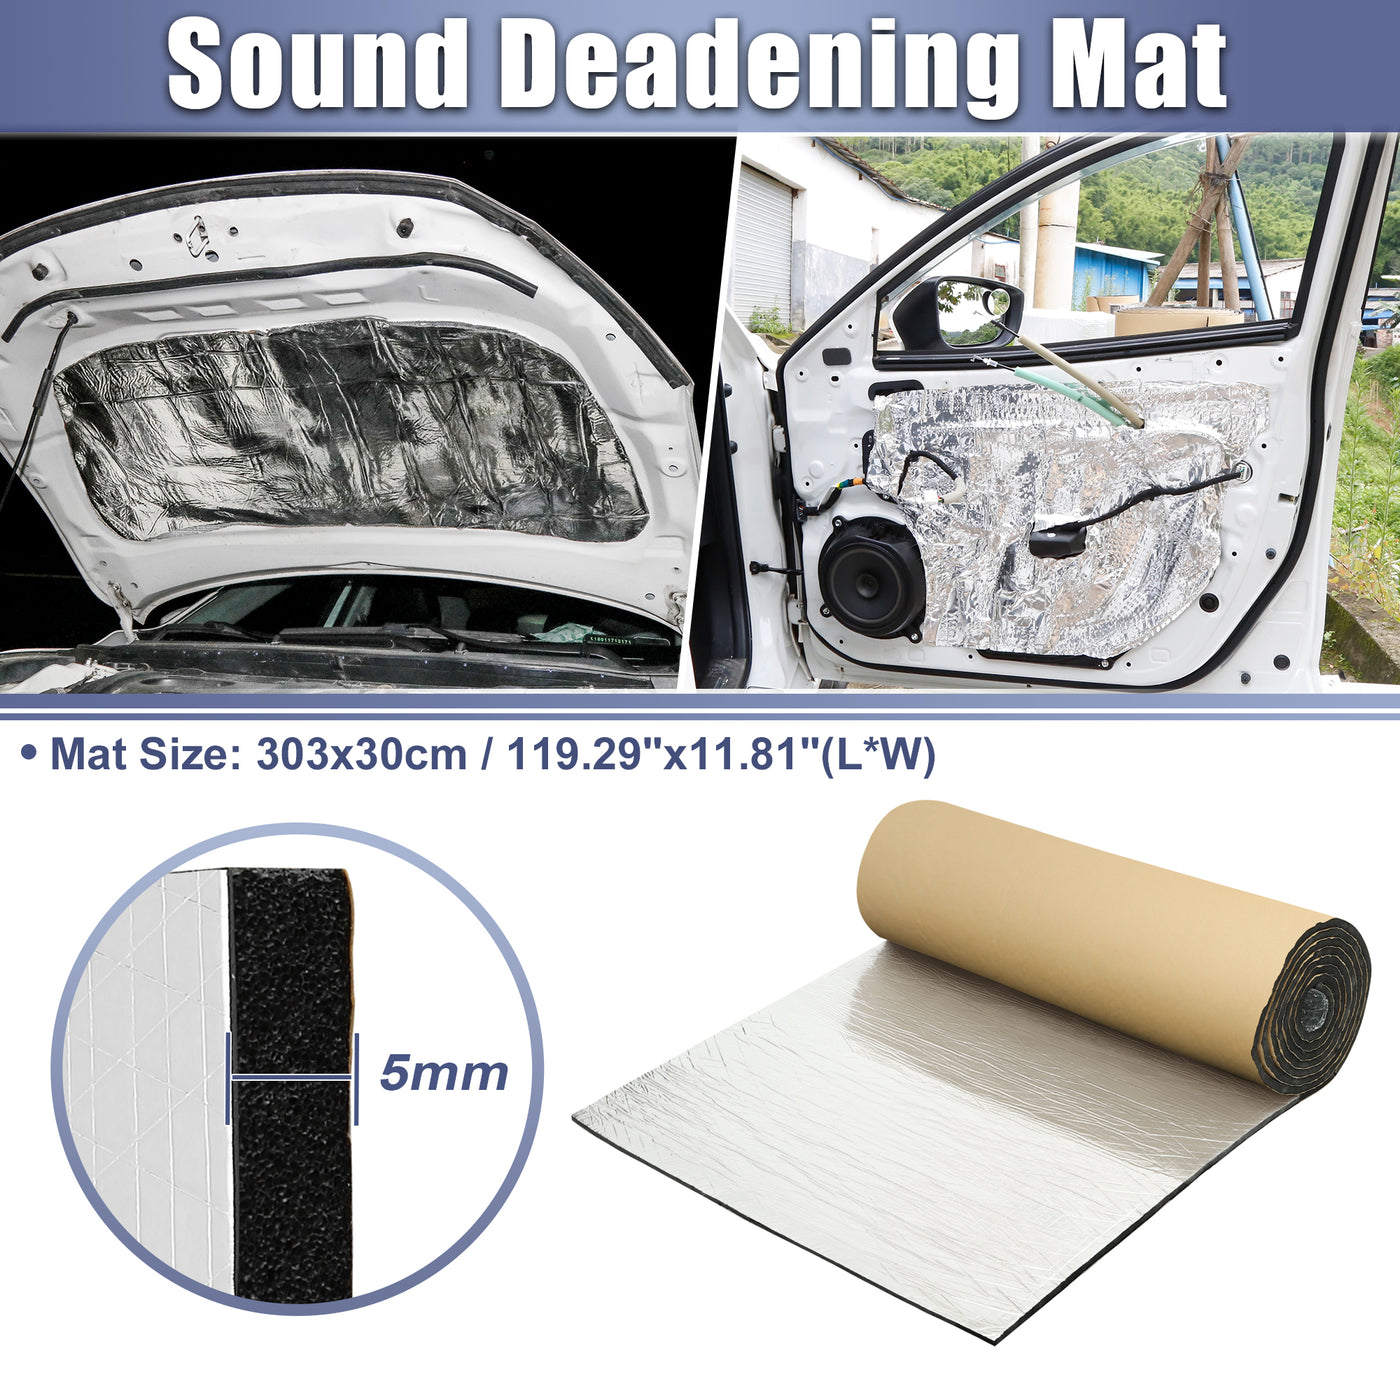 X AUTOHAUX 197mil 5mm 9.78sqft Car Sound Deadening Mat Aluminum Foil Closed Cell Foam Heat Shield Material Damping Self Adhesive Universal for Hood Fender and Boat Engine Cover 119.29"x11.81"